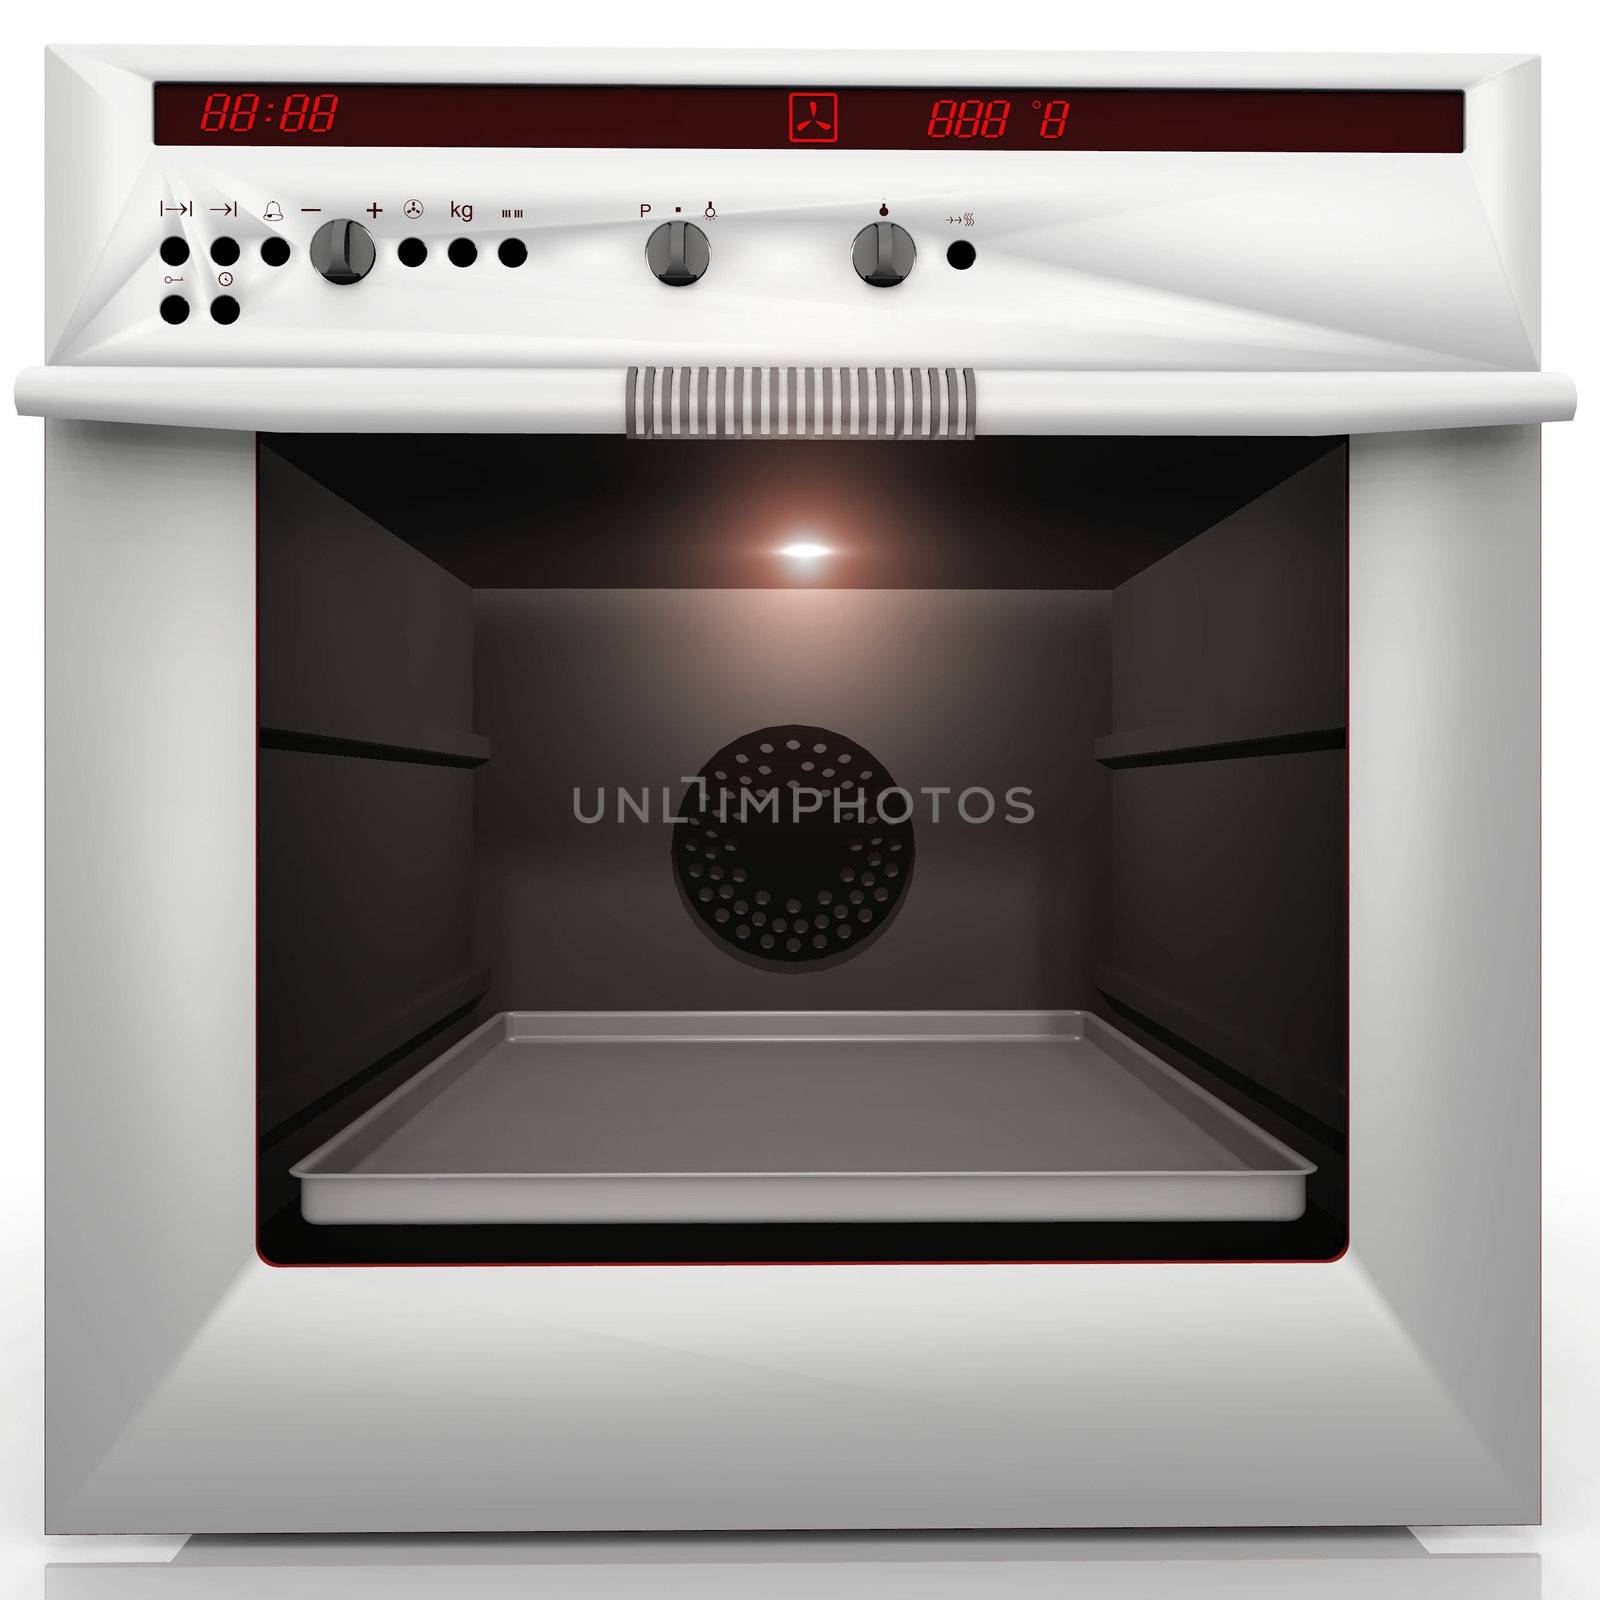 inside a great convection oven